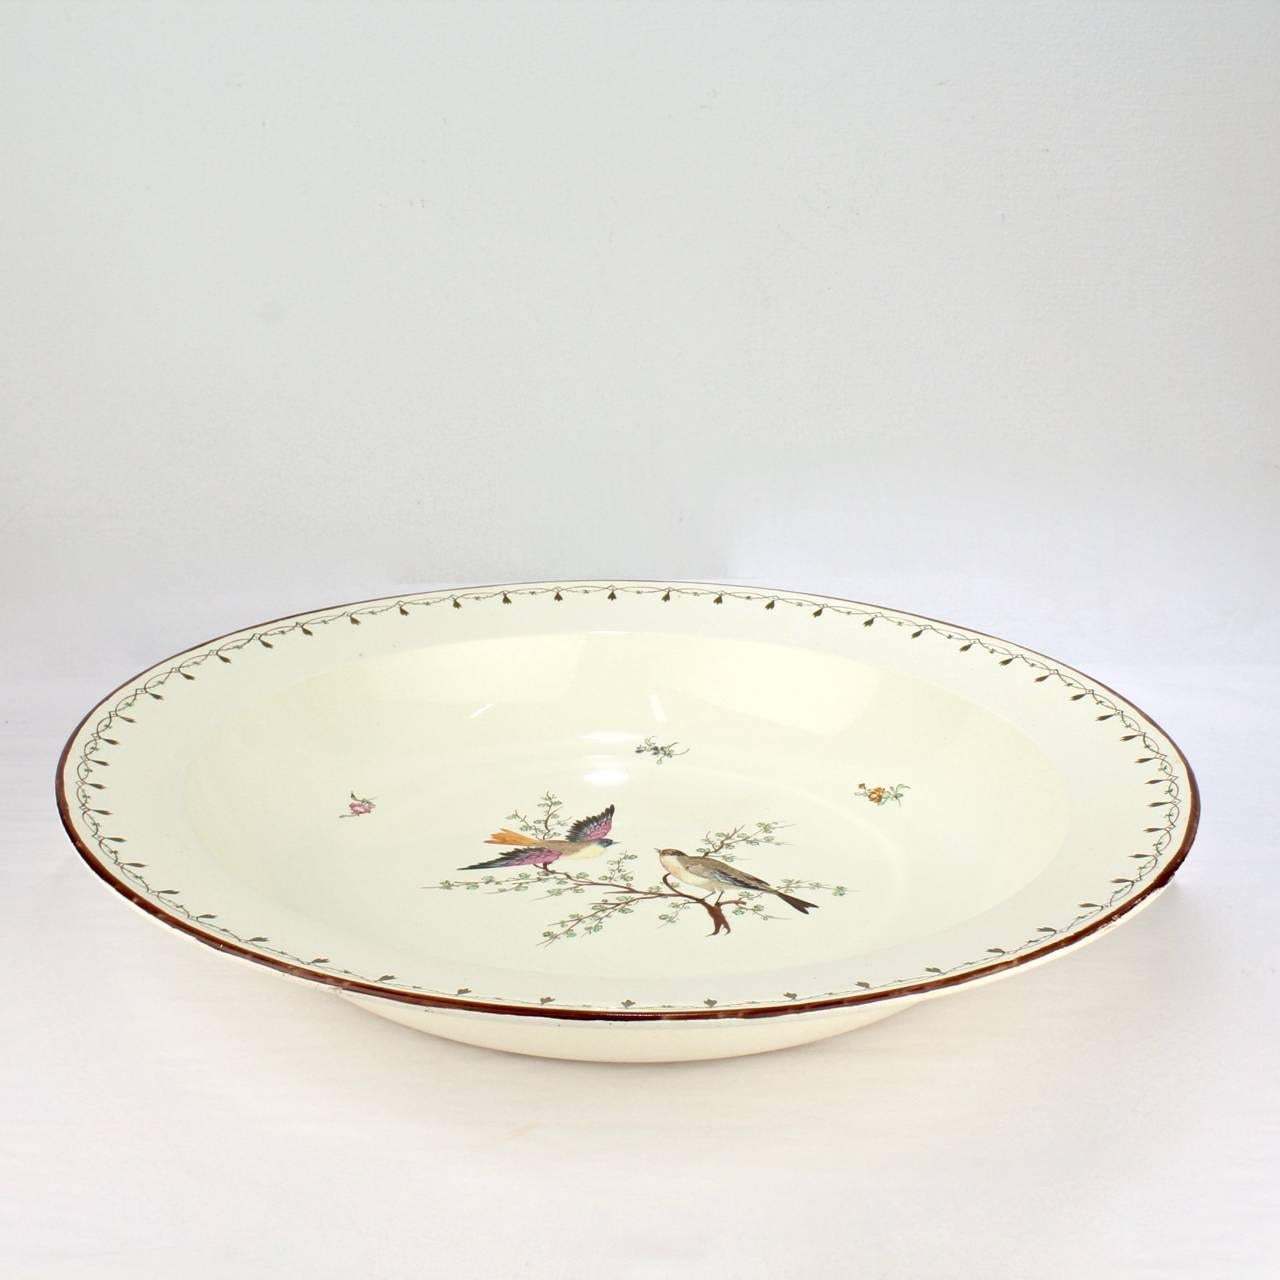 An impressively large, early 19th century Wedgwood creamware bowl. 

Ideal to hold the centre of a well-set table or as wall or mantel piece.

With hand-painted birds on branches, floral sprays, and a loop and arrow border decoration.

This